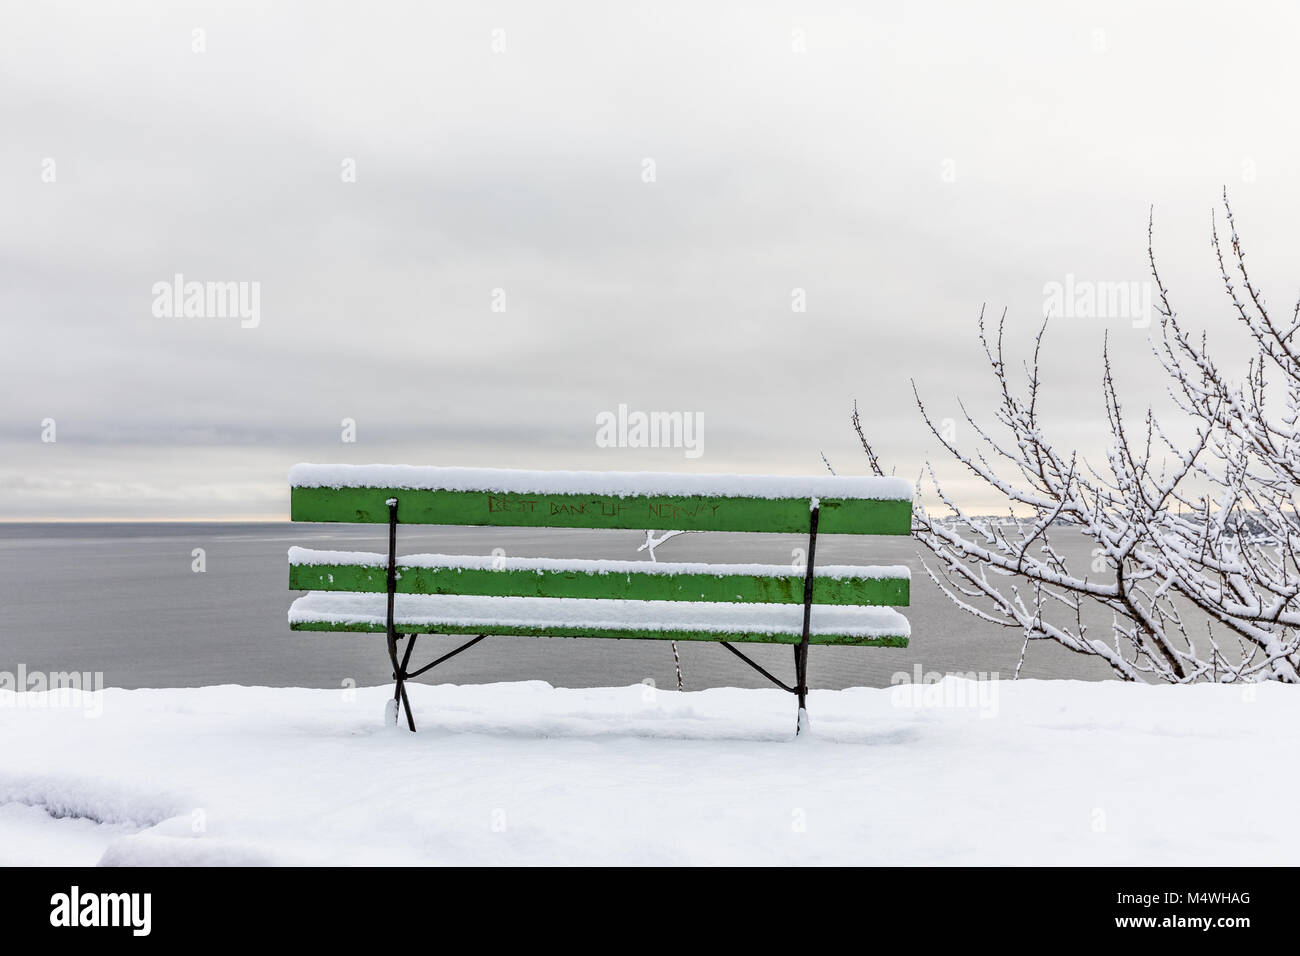 Beautiful winter day at Odderoya in Kristiansand, Norway. Green bench covered in snow. The ocean is seen in the background. Stock Photo